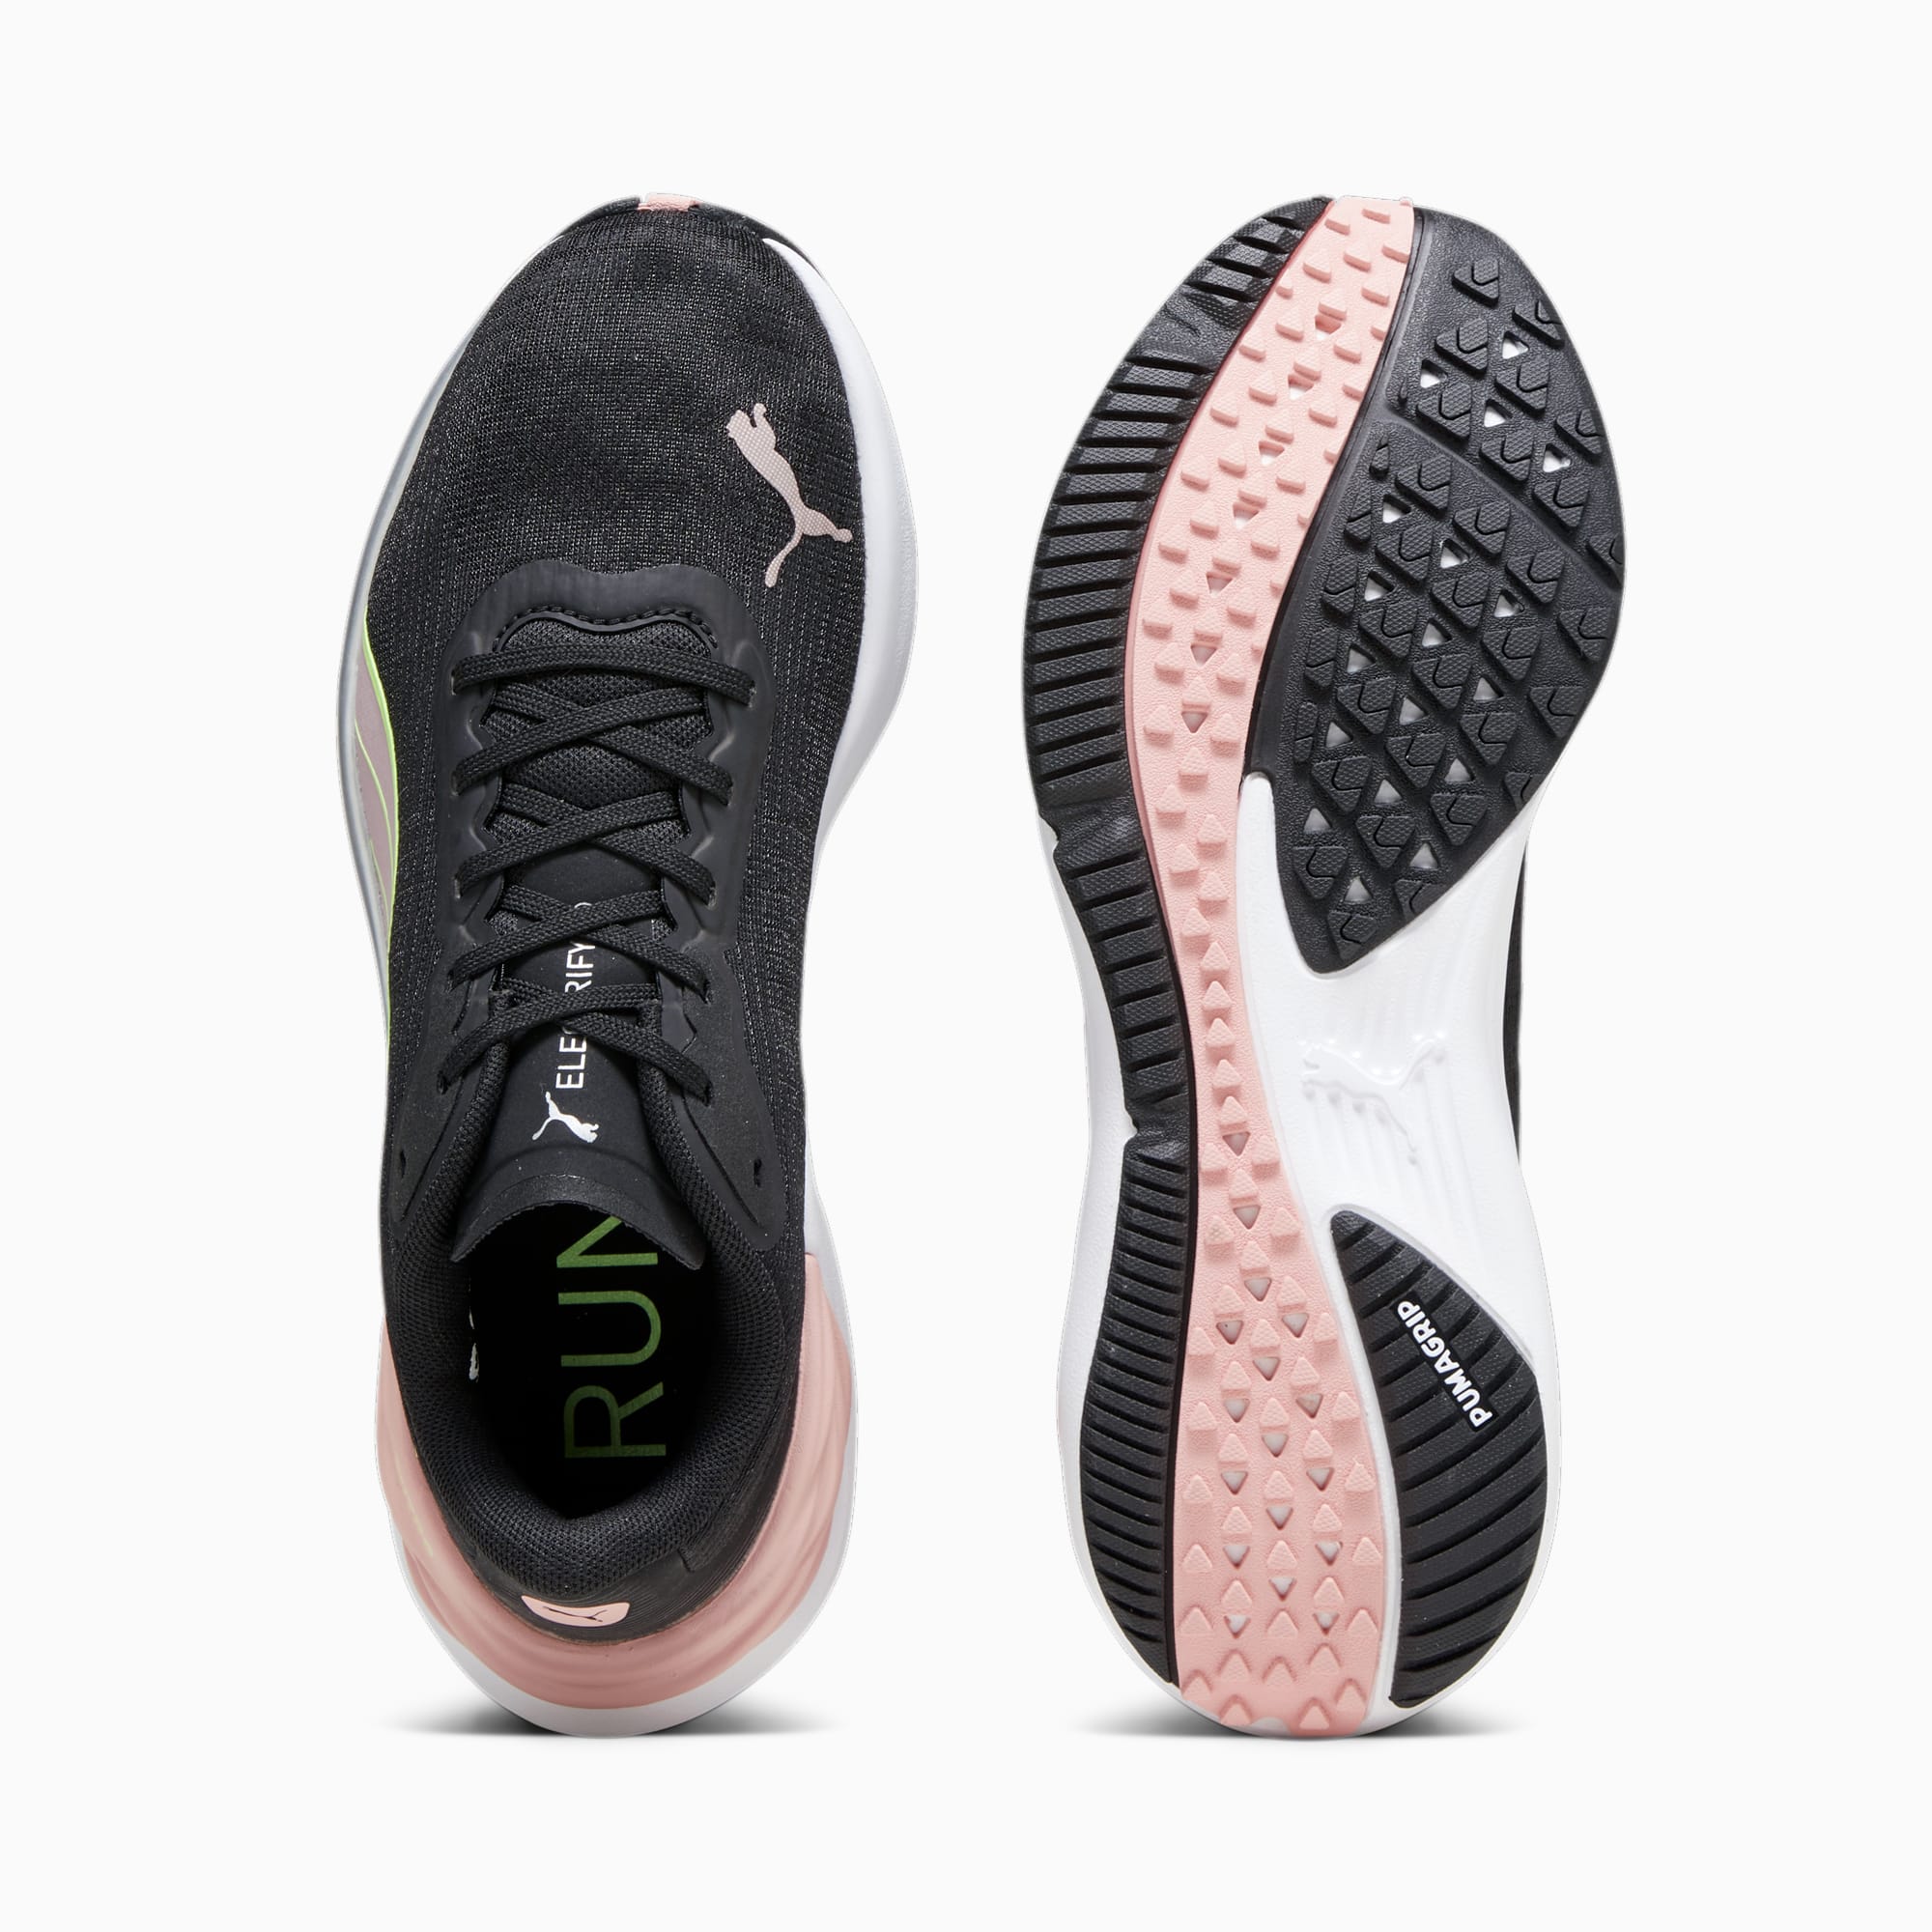 PUMA Electrify Nitro™ 3 Women's Running Shoes, Black/Peach Smoothie/Speed Green, Size 35,5, Shoes